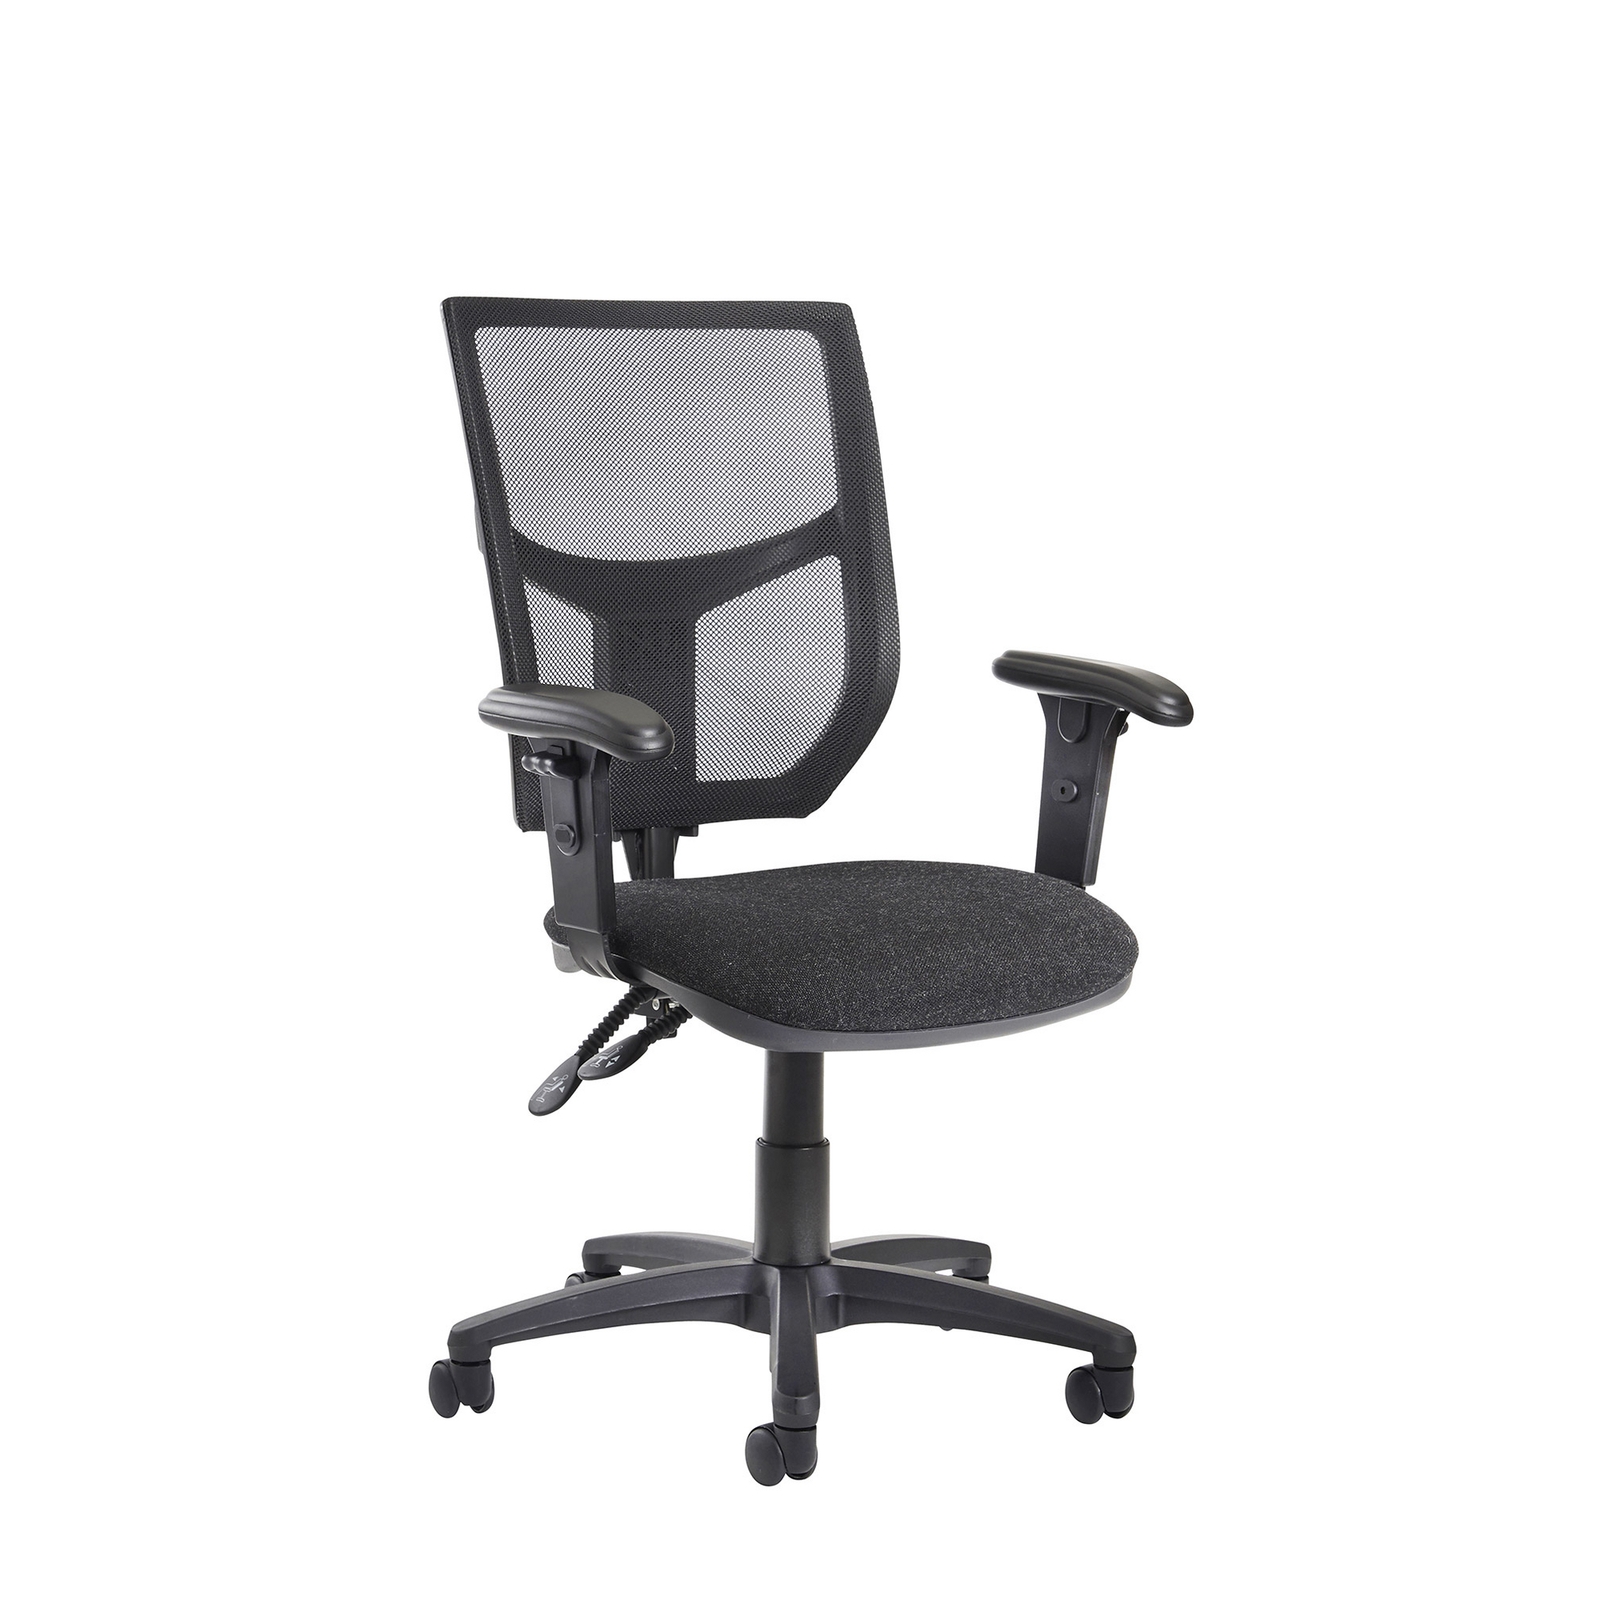 Altino Charcoal High Back Operator's Chair Adjustable Arms - Each